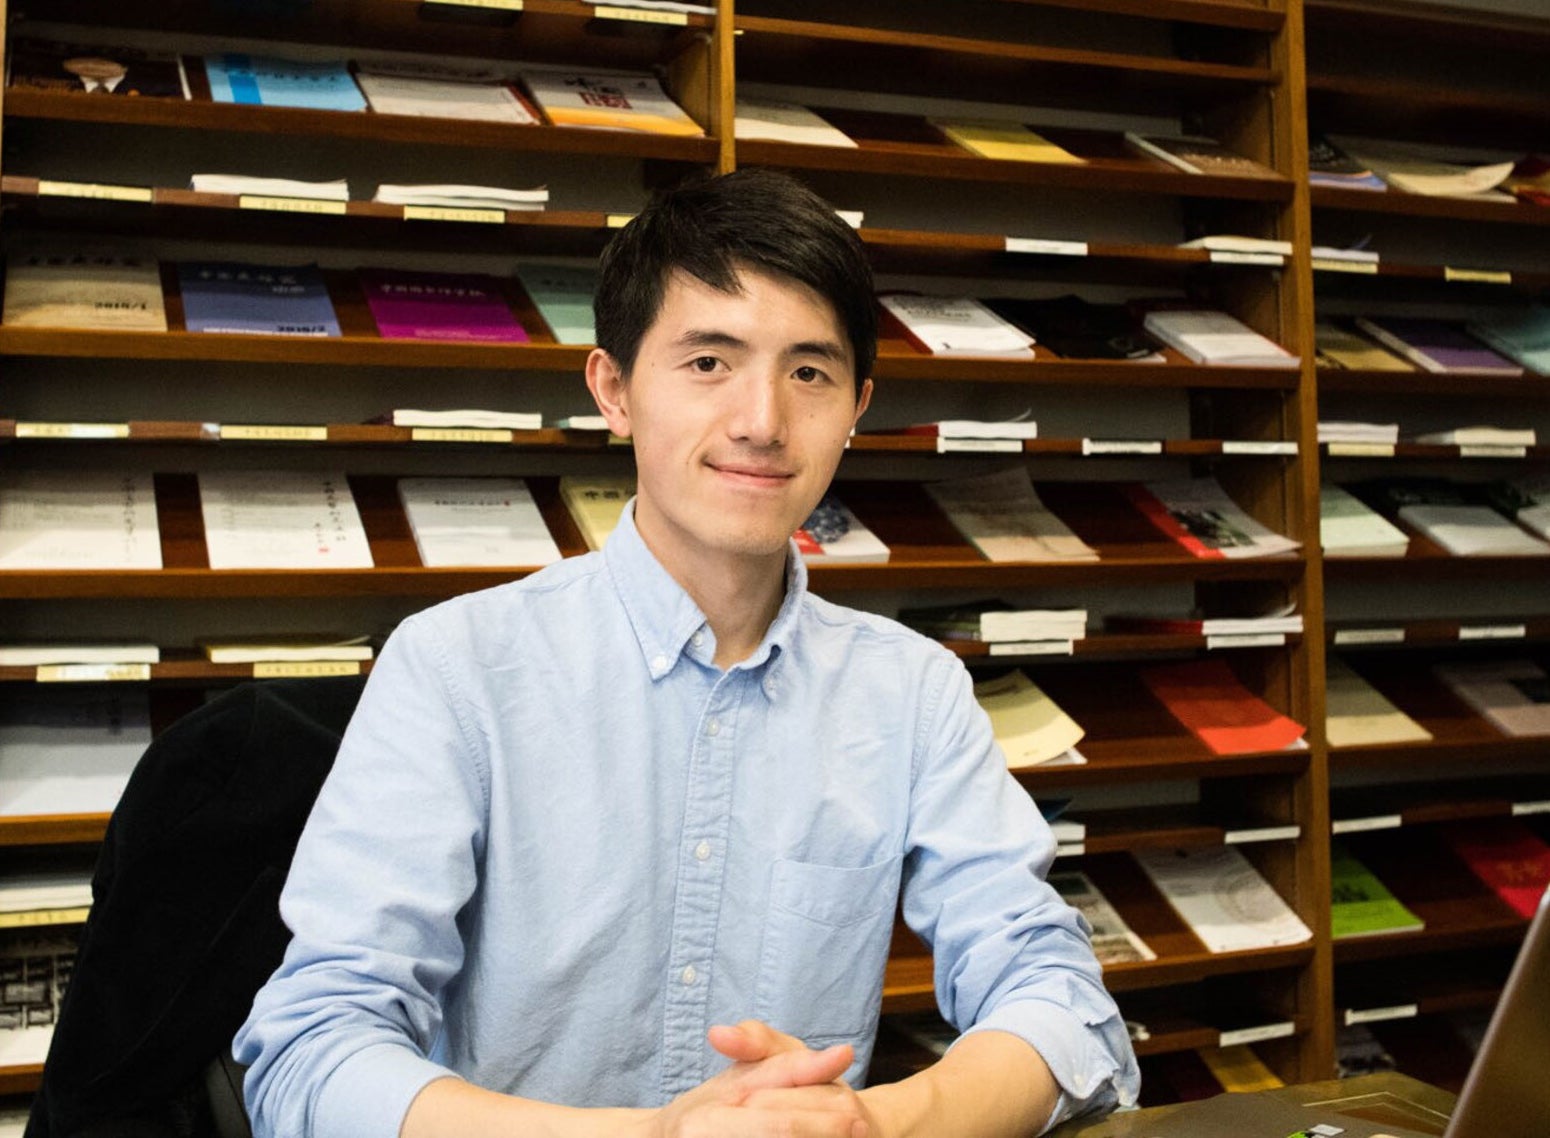 A young man sits in front of large book shelves containing research and other materials